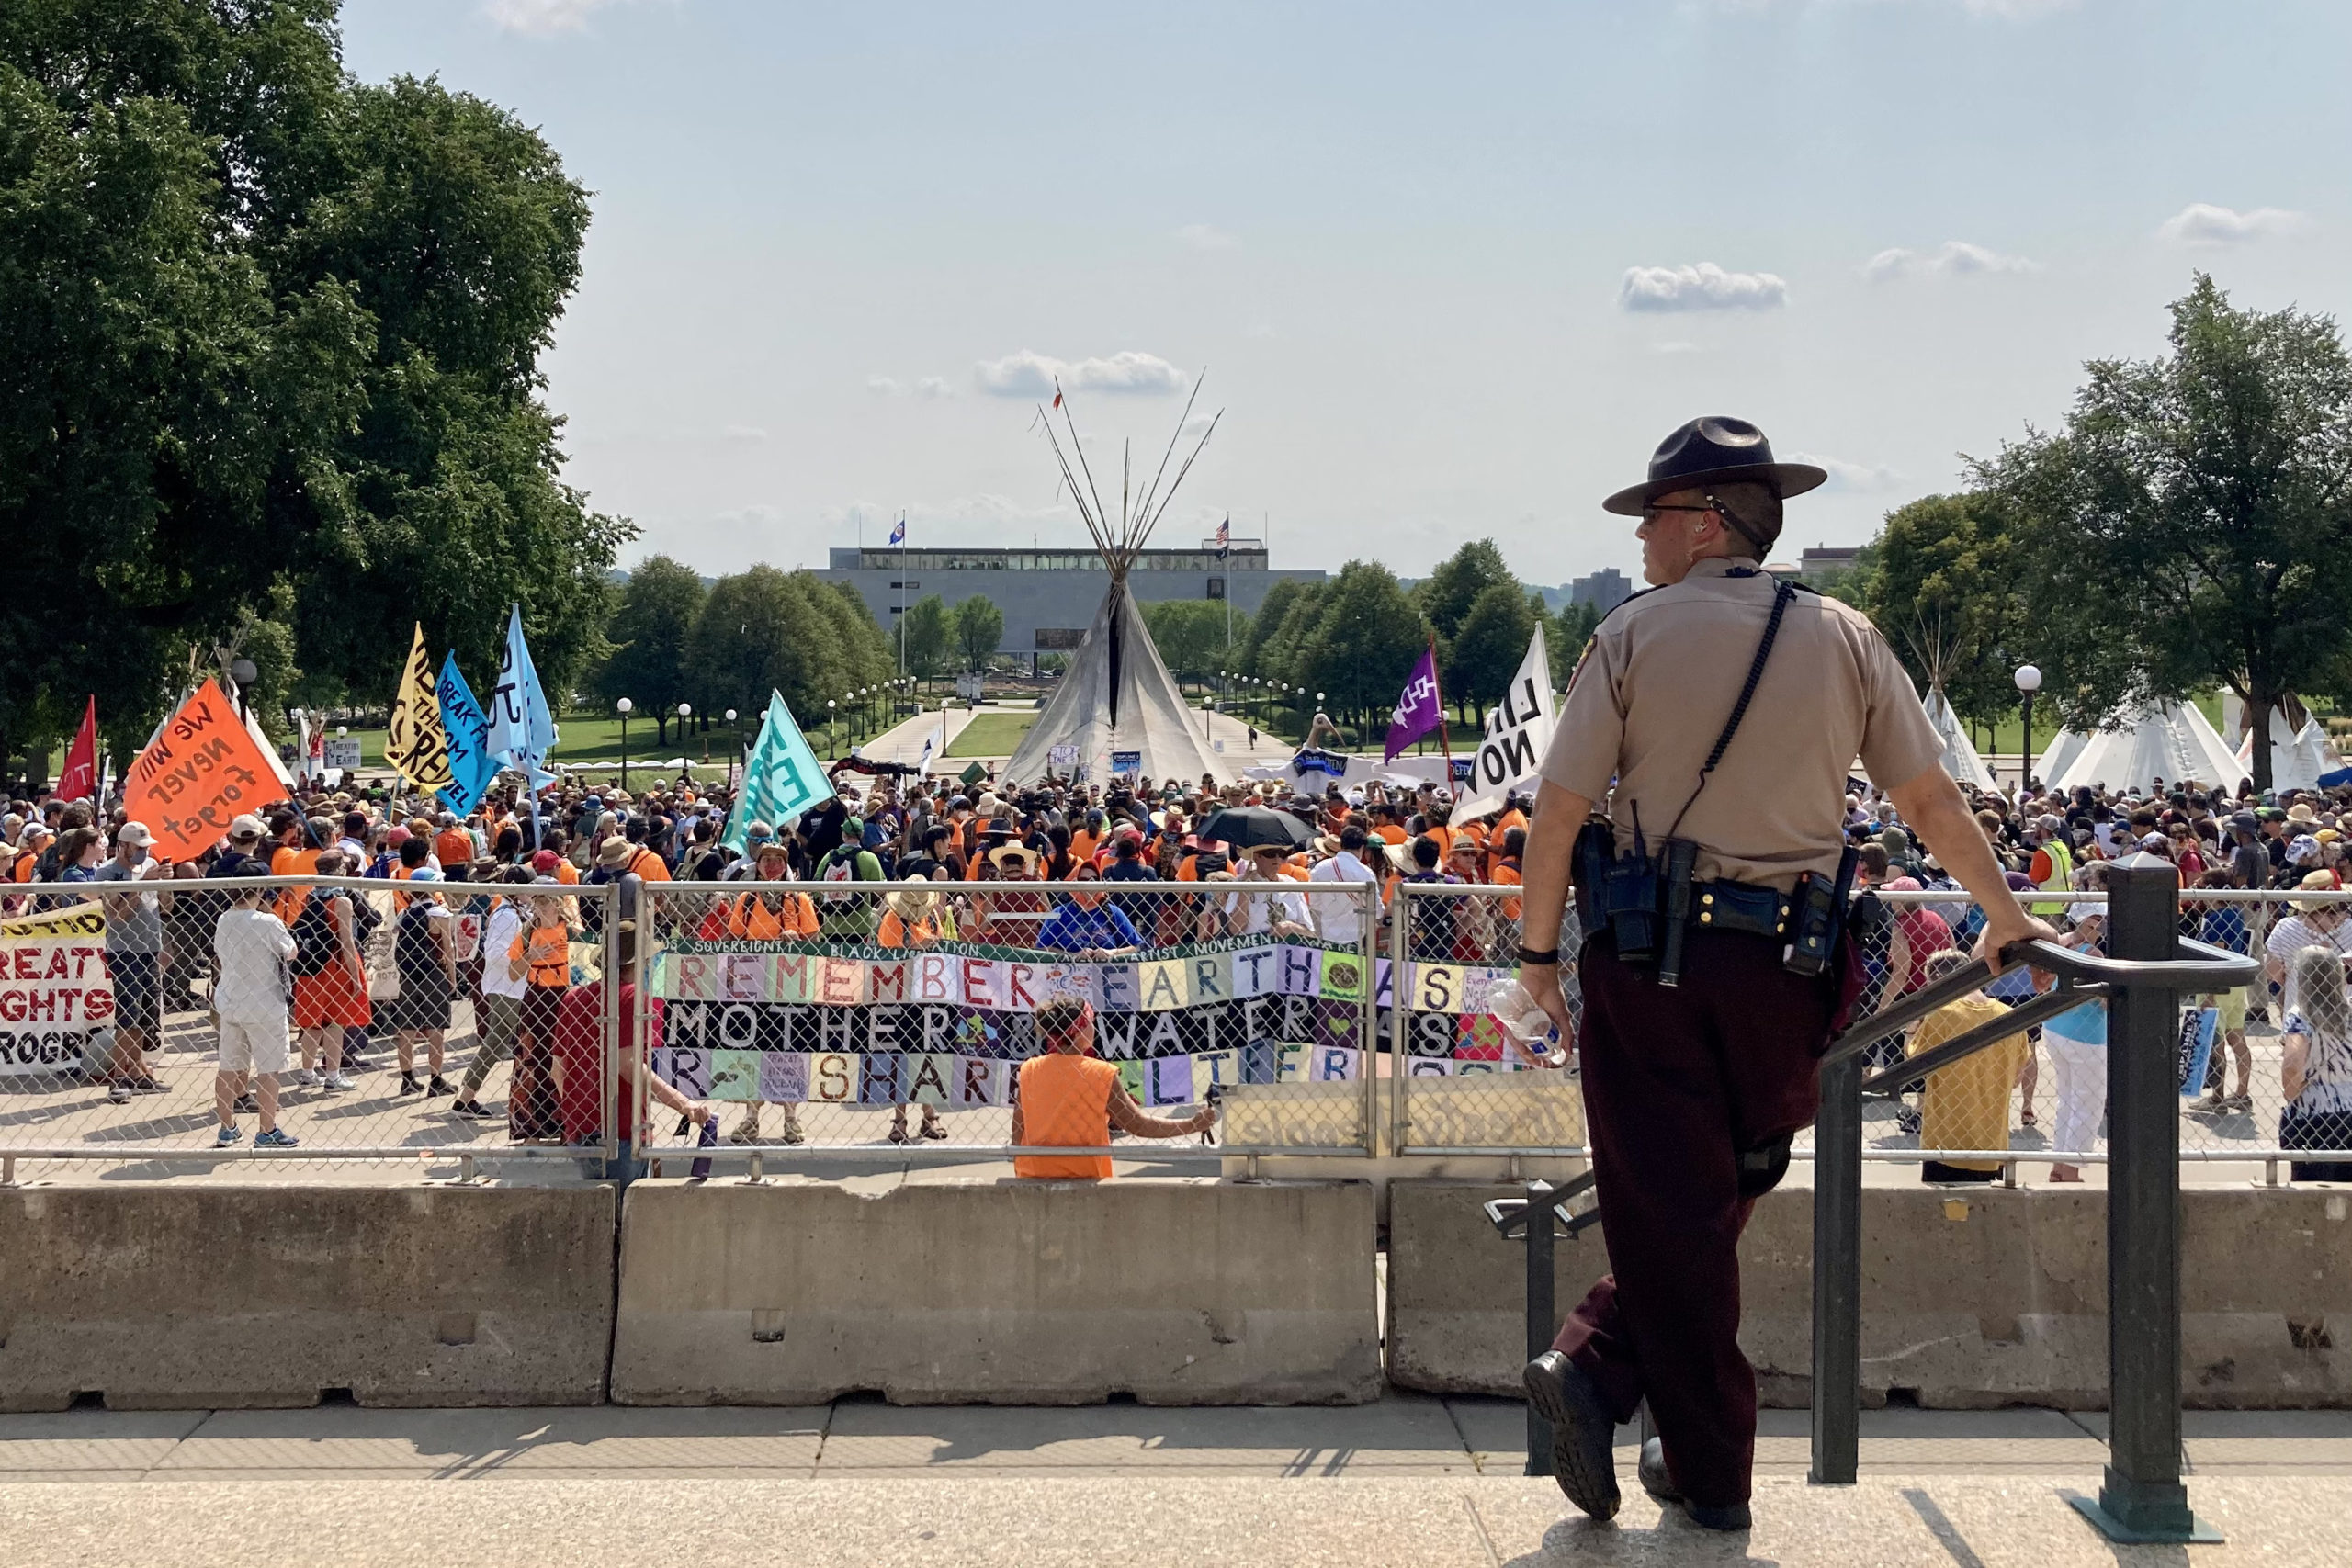 In anticipation of Indigenous people arriving on his doorstep, Governor Tim Walz shut down the Minnesota State Capitol for a week and installed concrete barricades and fencing. Hundreds of law enforcement officers patrolled the grounds for that week.